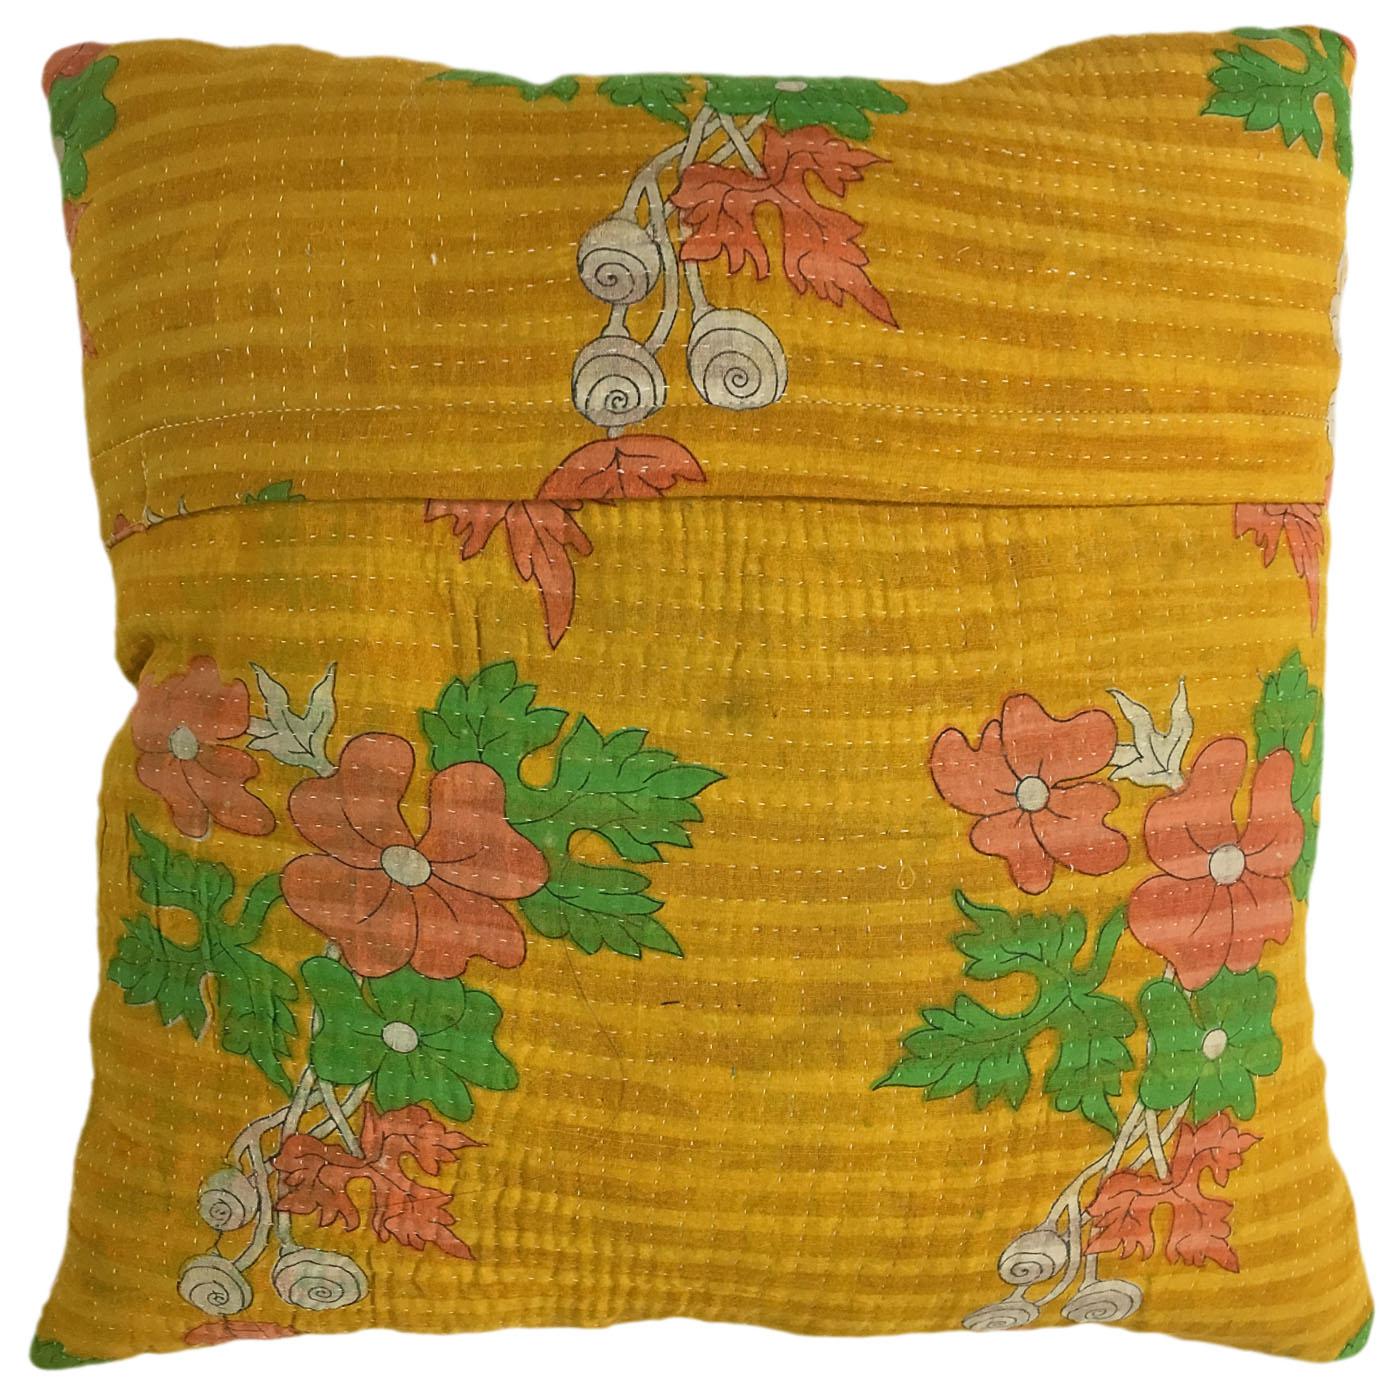 30X50CM Vintage Kantha Christmas Pillow Cover Indian Bohemian Patchwork Kantha Pillow Cover For Christmas Gift Antique Kantha Throw Pillow